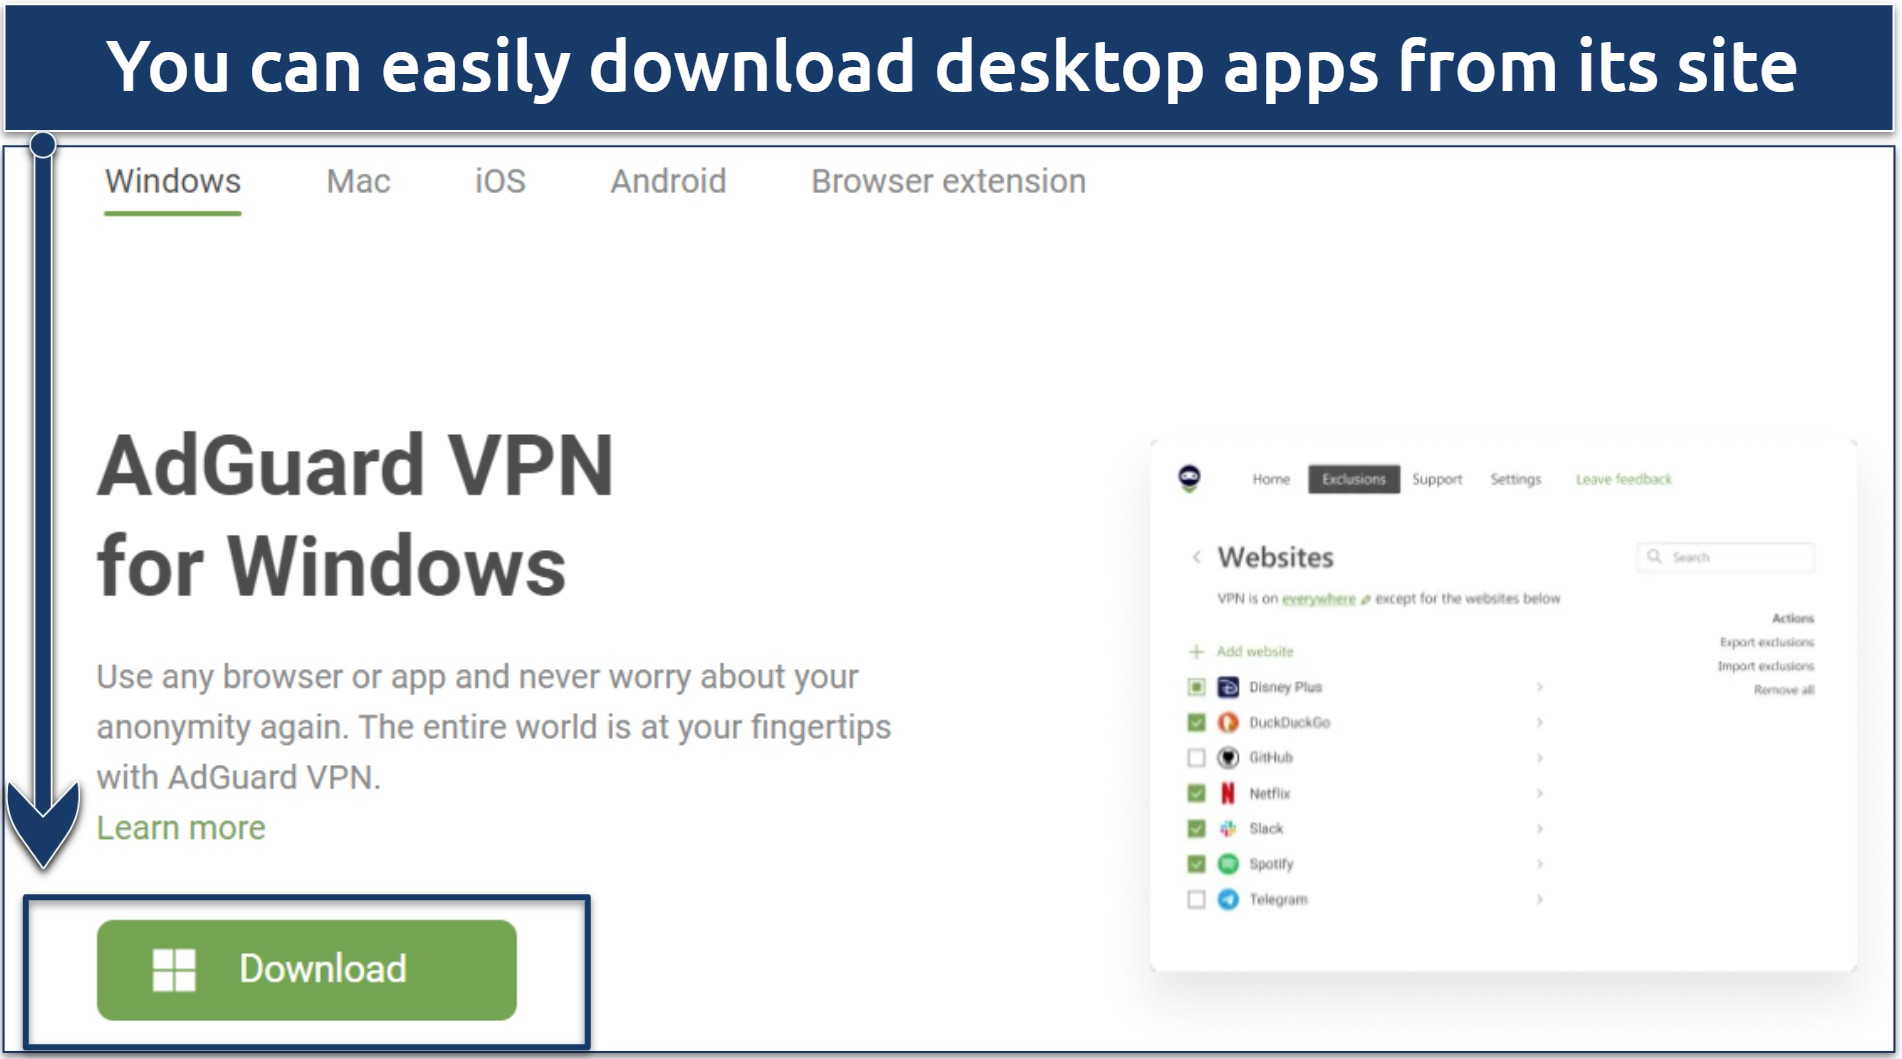 A screenshot showing AdGuard VPN's download page